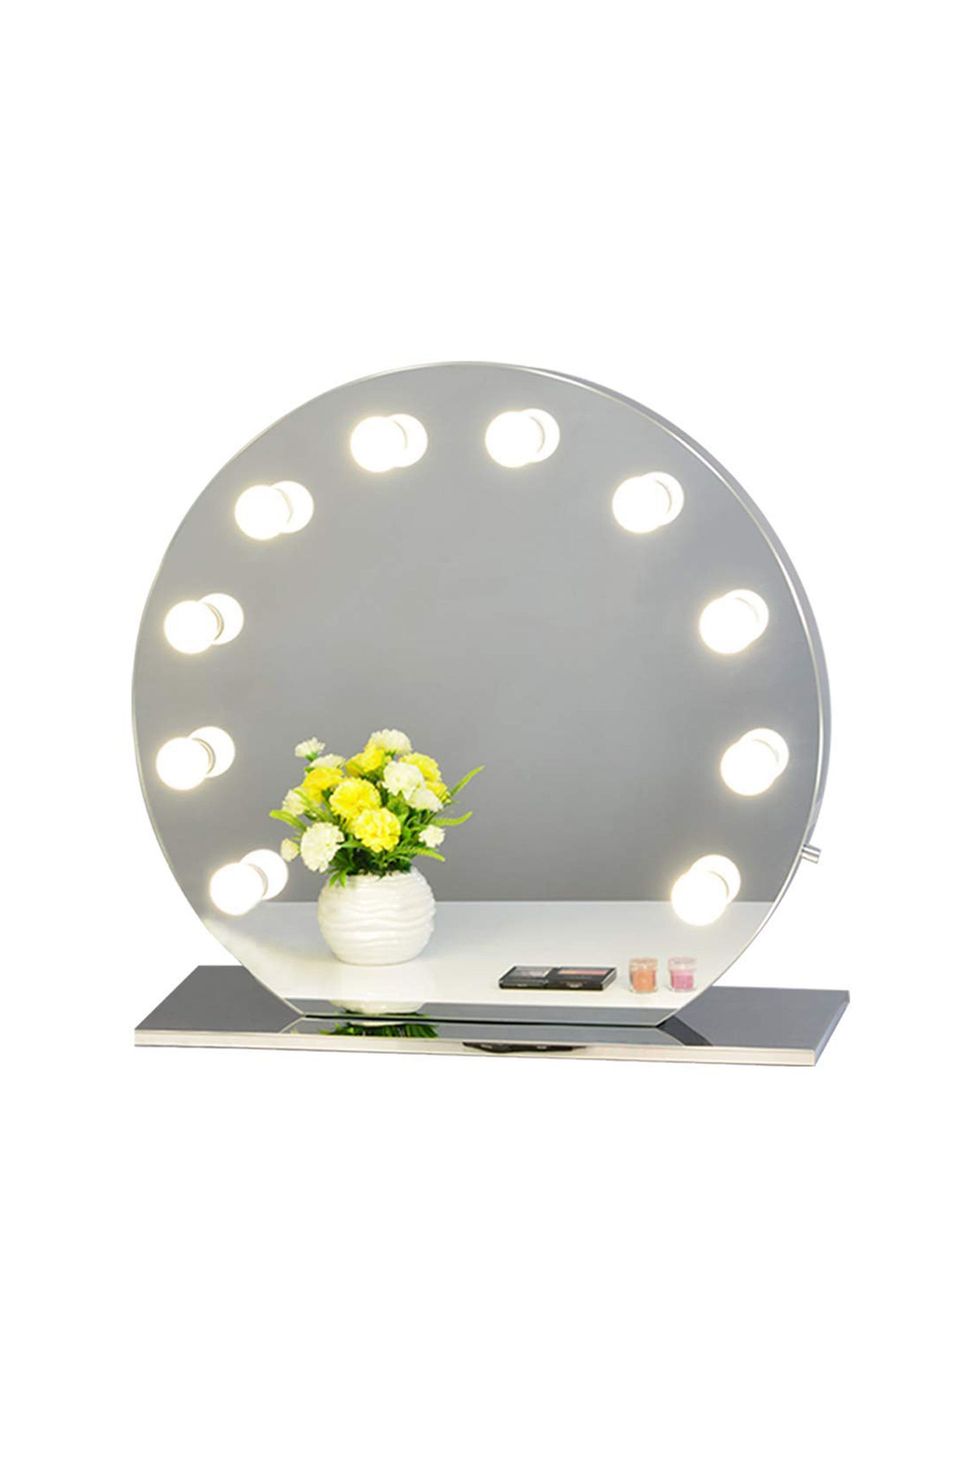 Chende LED Vanity Light for Mirror, Hollywood Style Makeup Lights